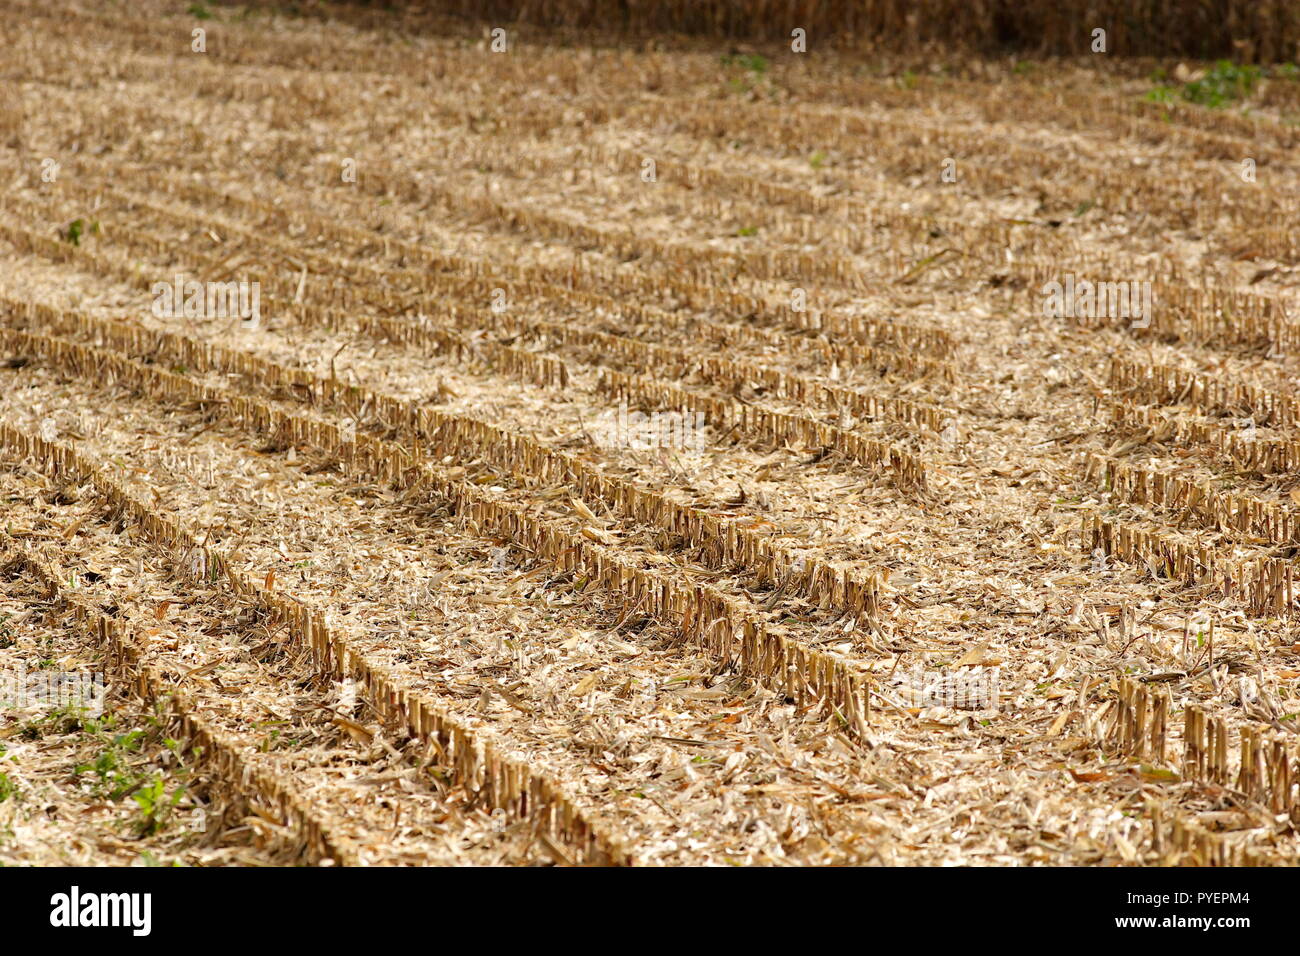 Field of corn after being harvested showing the plant stubble left behind and how the crop was planted in straight rows, near Hindon Wiltshire U.K. Stock Photo